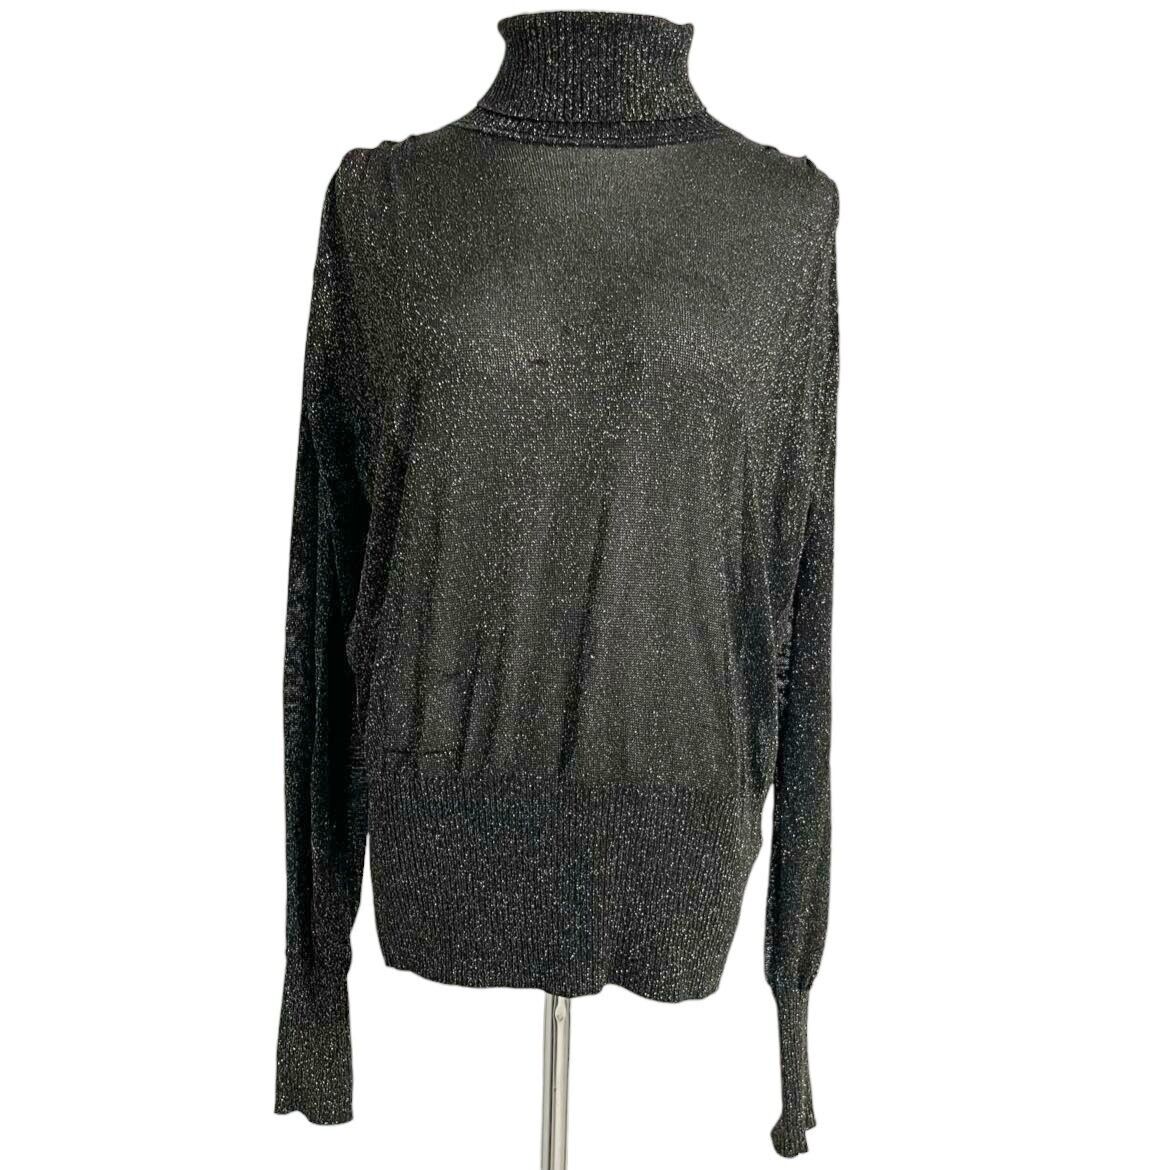 Reiss Large Top Blouse Long Sleeve Turtle Neck Sh… - image 1